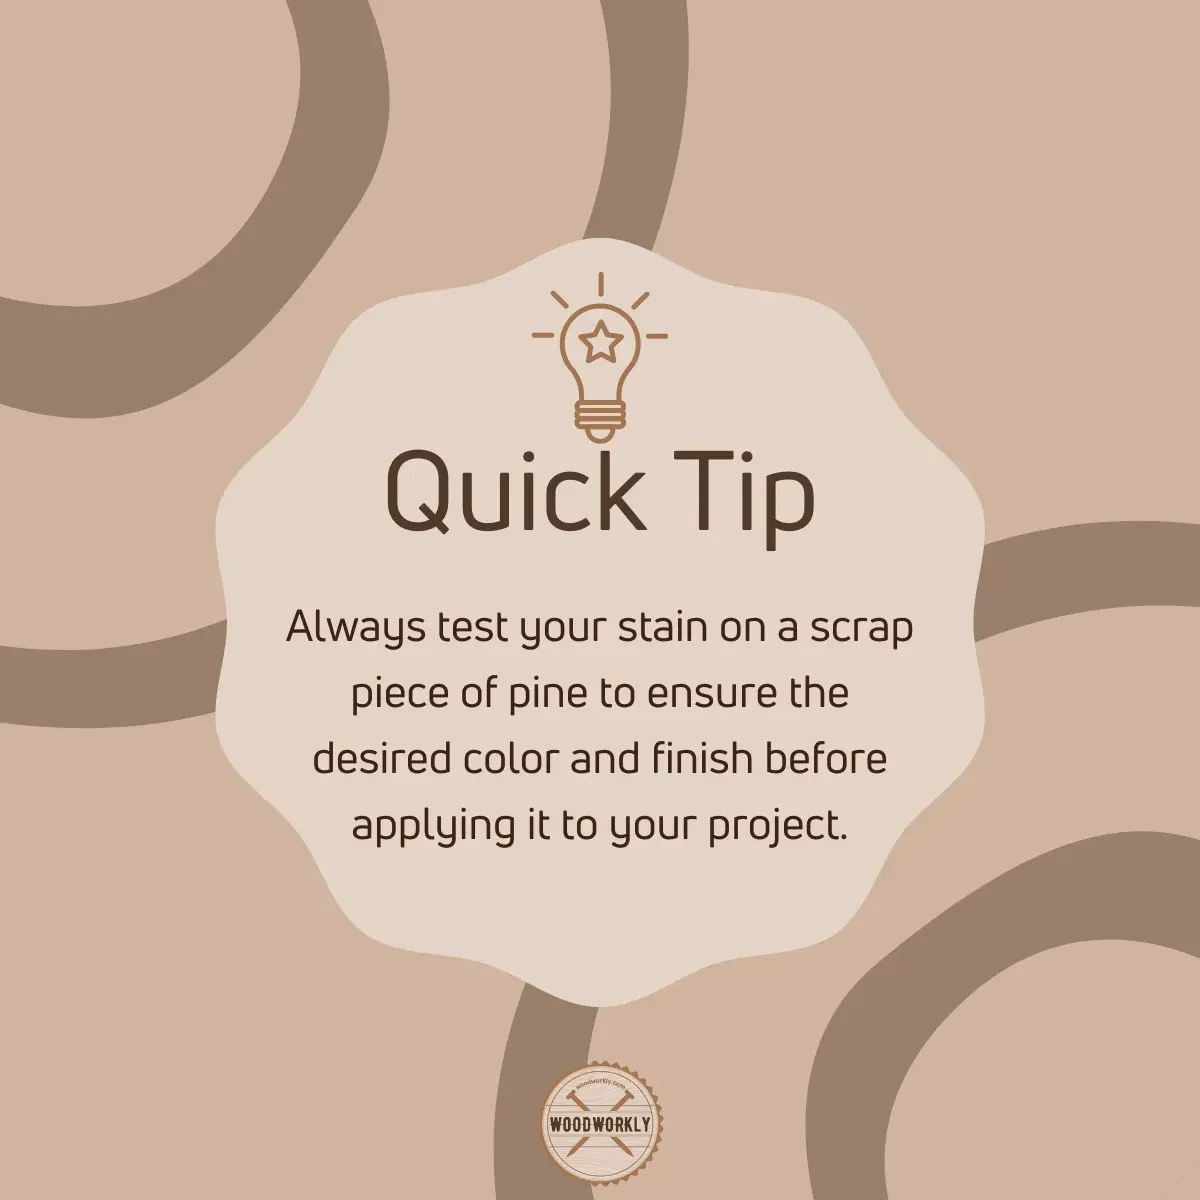 quicky tip for staining pinewood